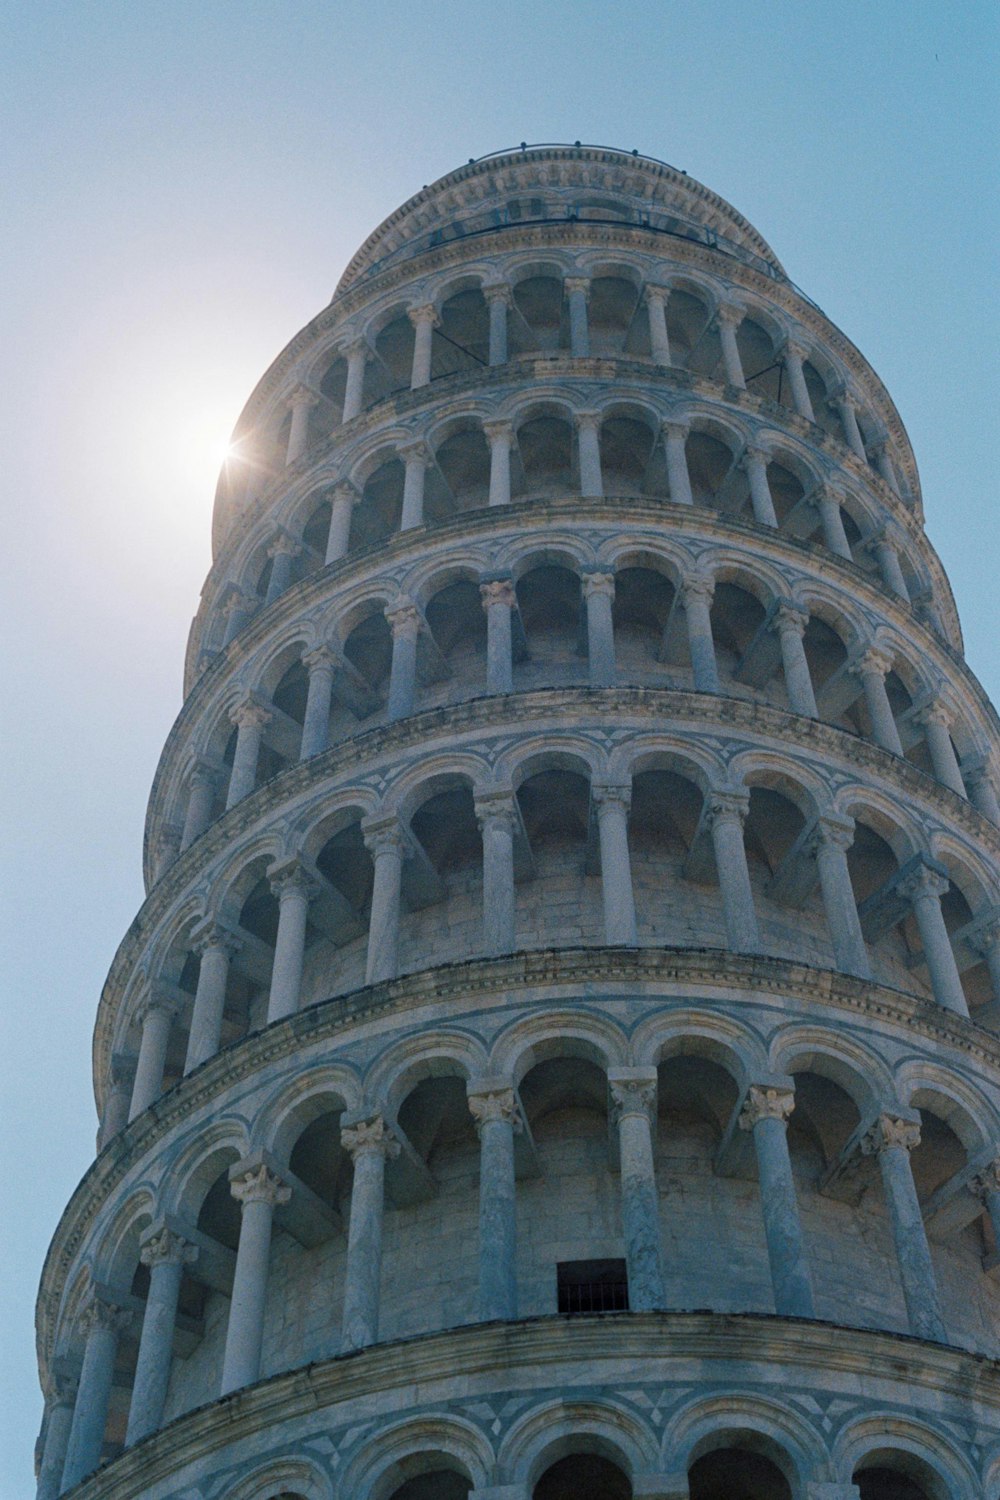 a tall stone building with Leaning Tower of Pisa in the background